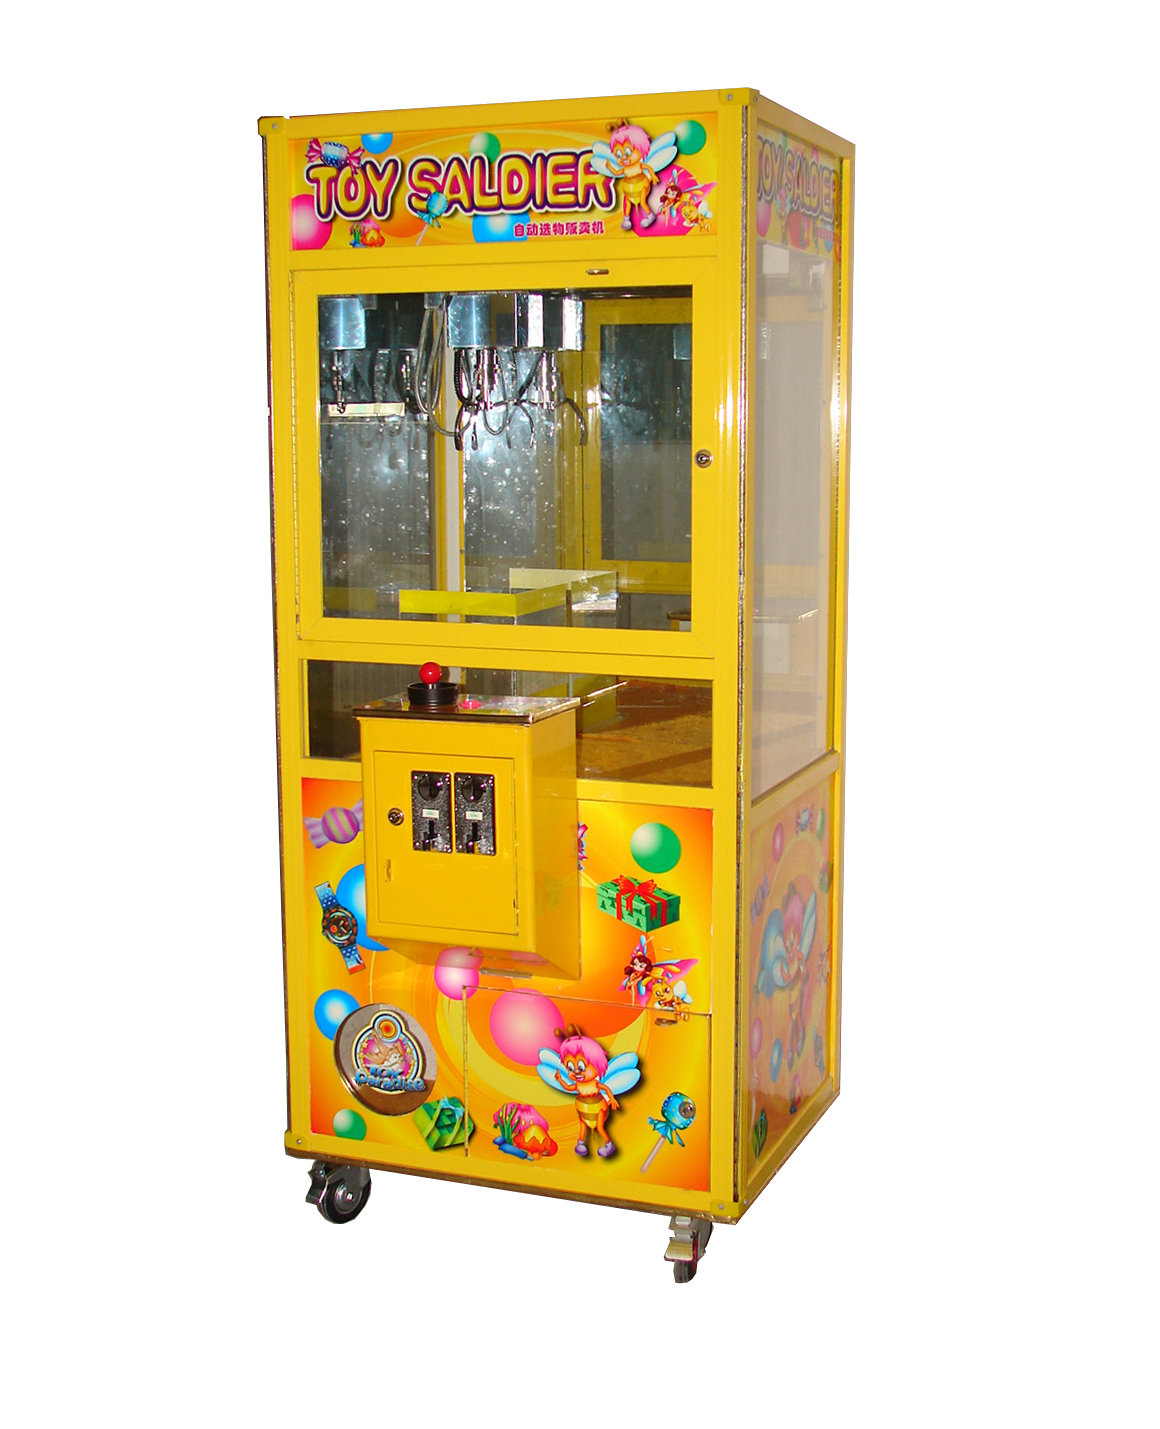 Low price coin operated Saldier toy crane game machine